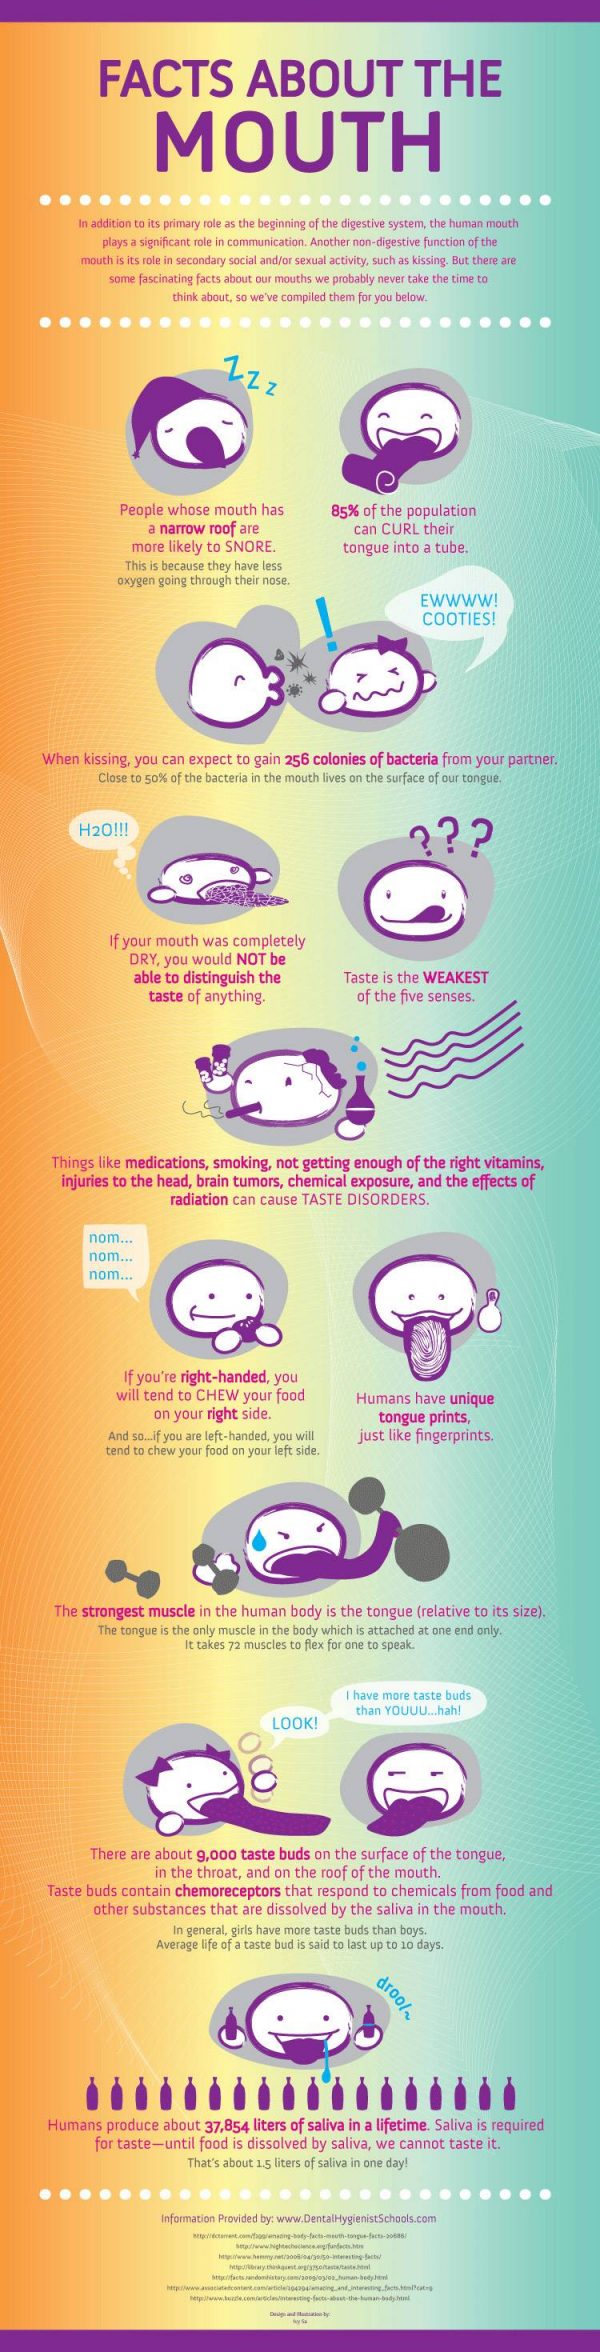 Facts About the Mouth (Infographic)